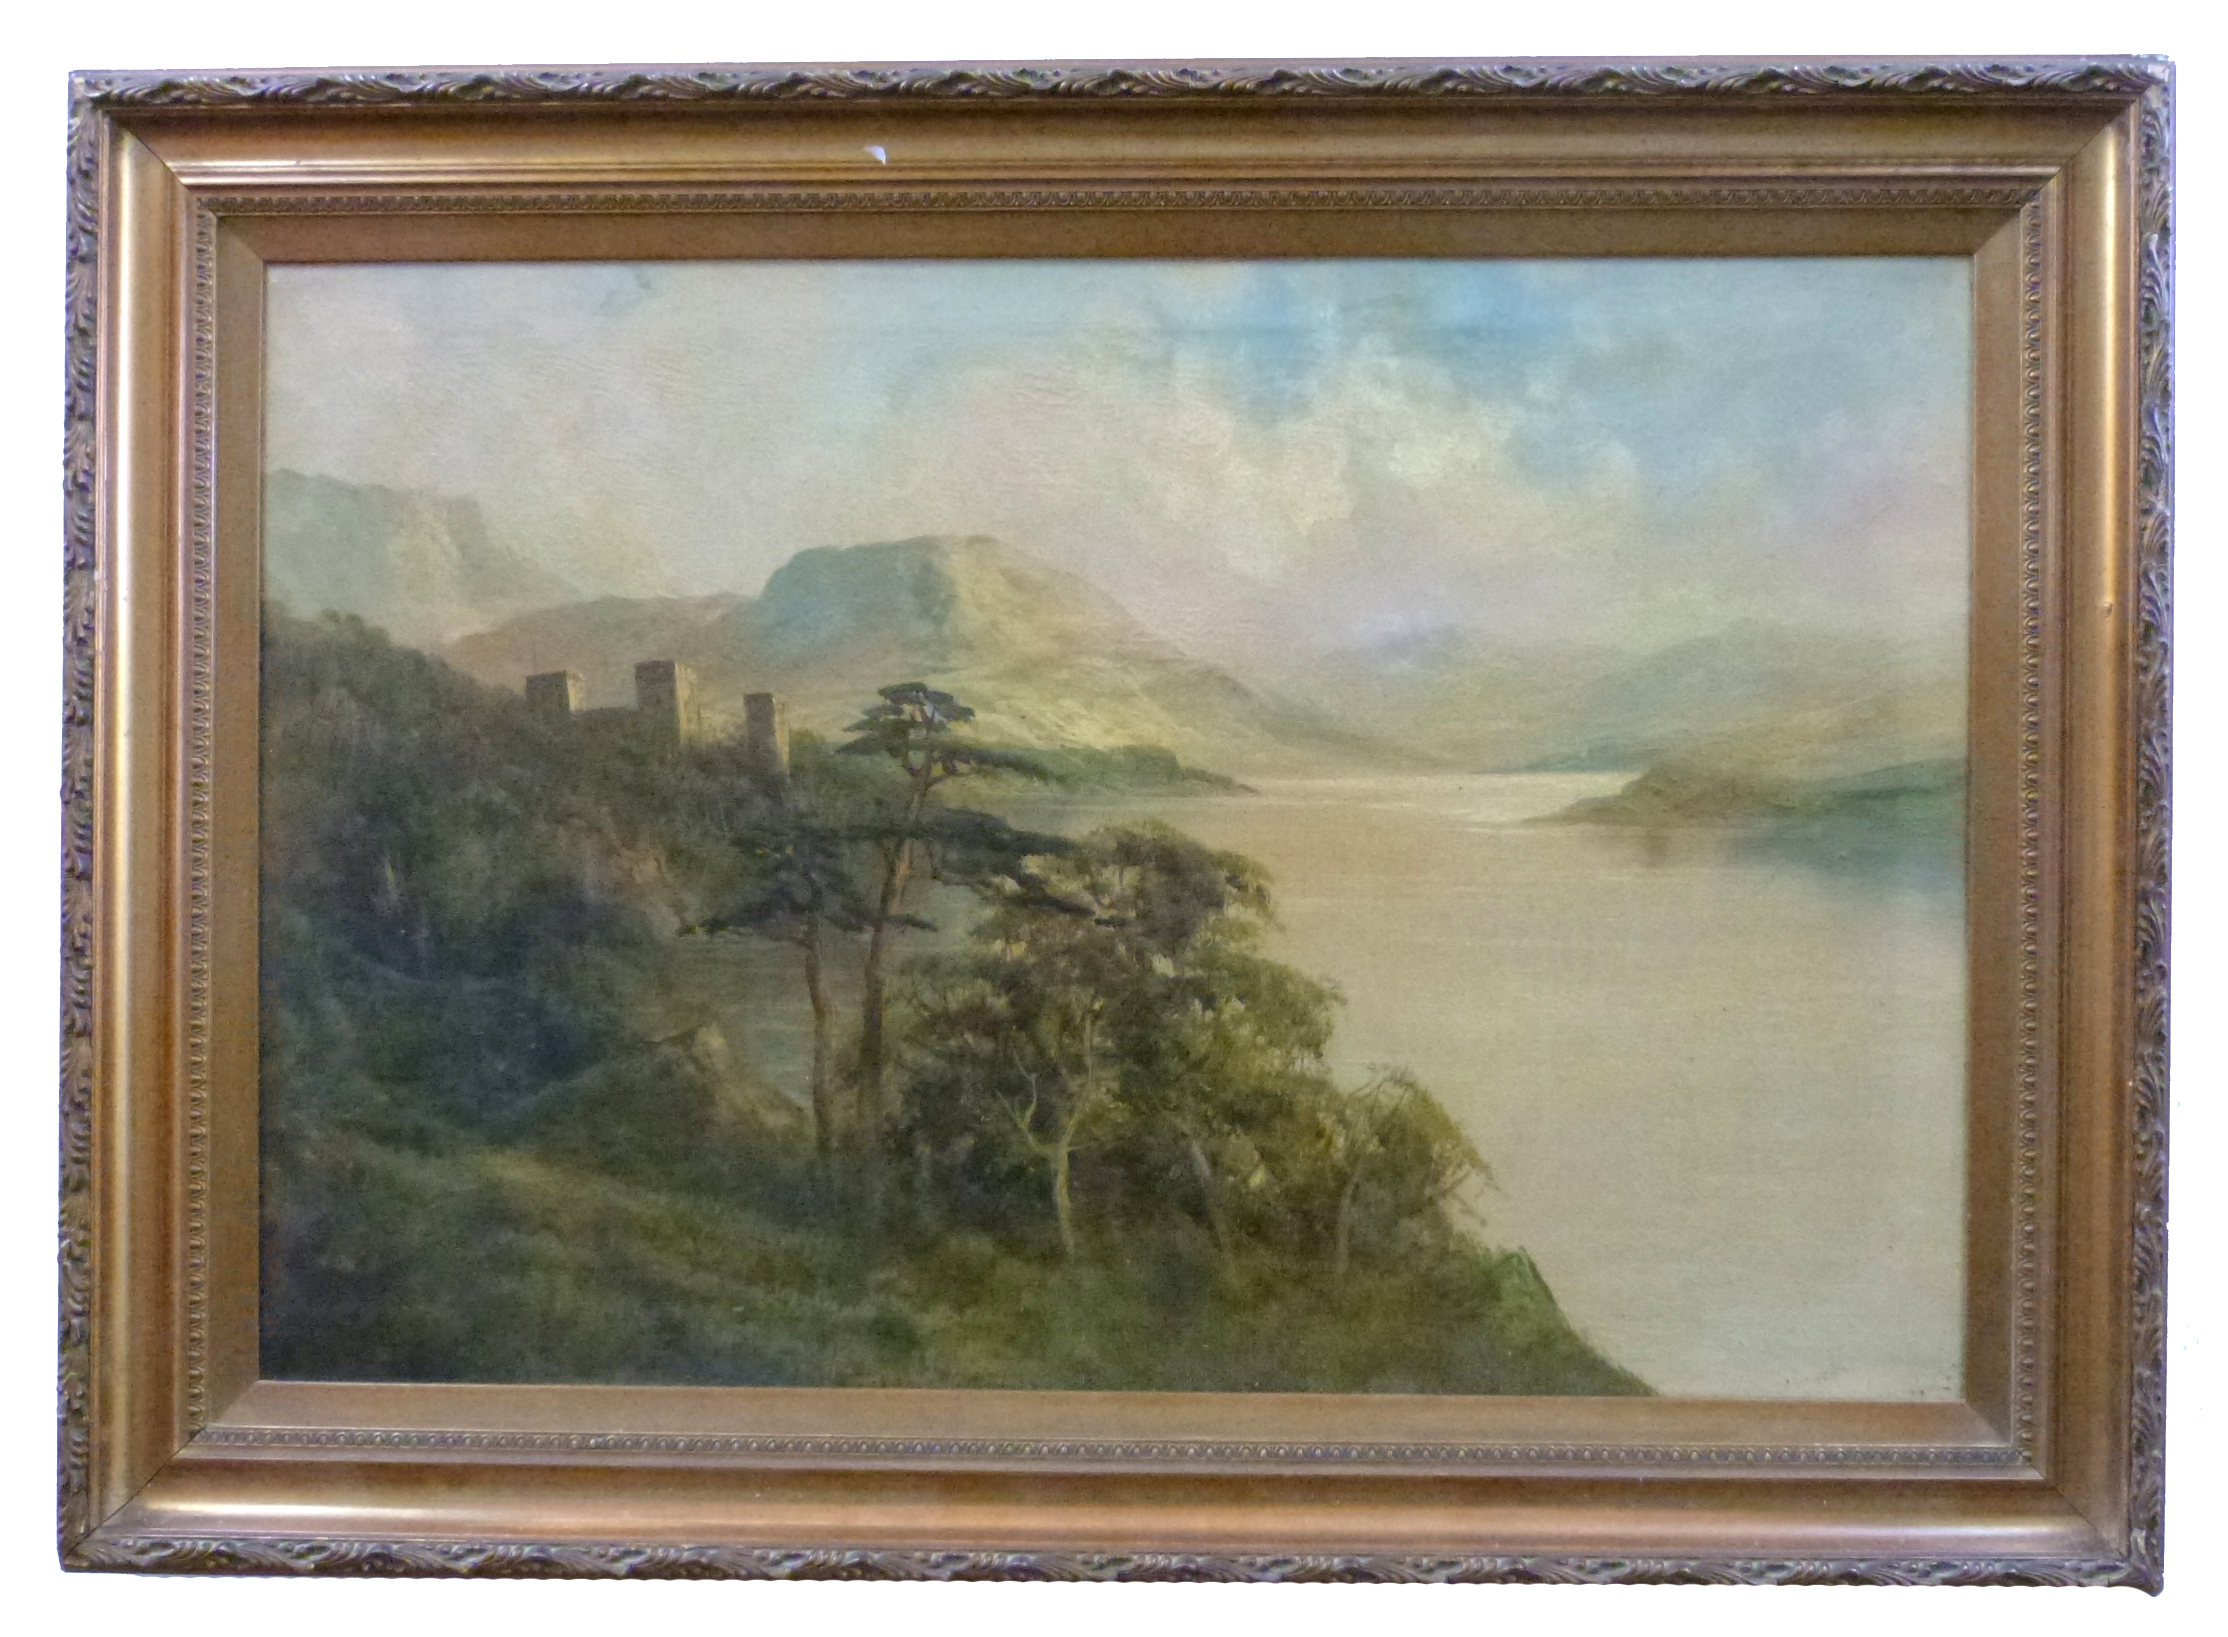 British, 20th century, Pair of Landscapes showing a castle overlooking a lake and mountain in - Image 3 of 4